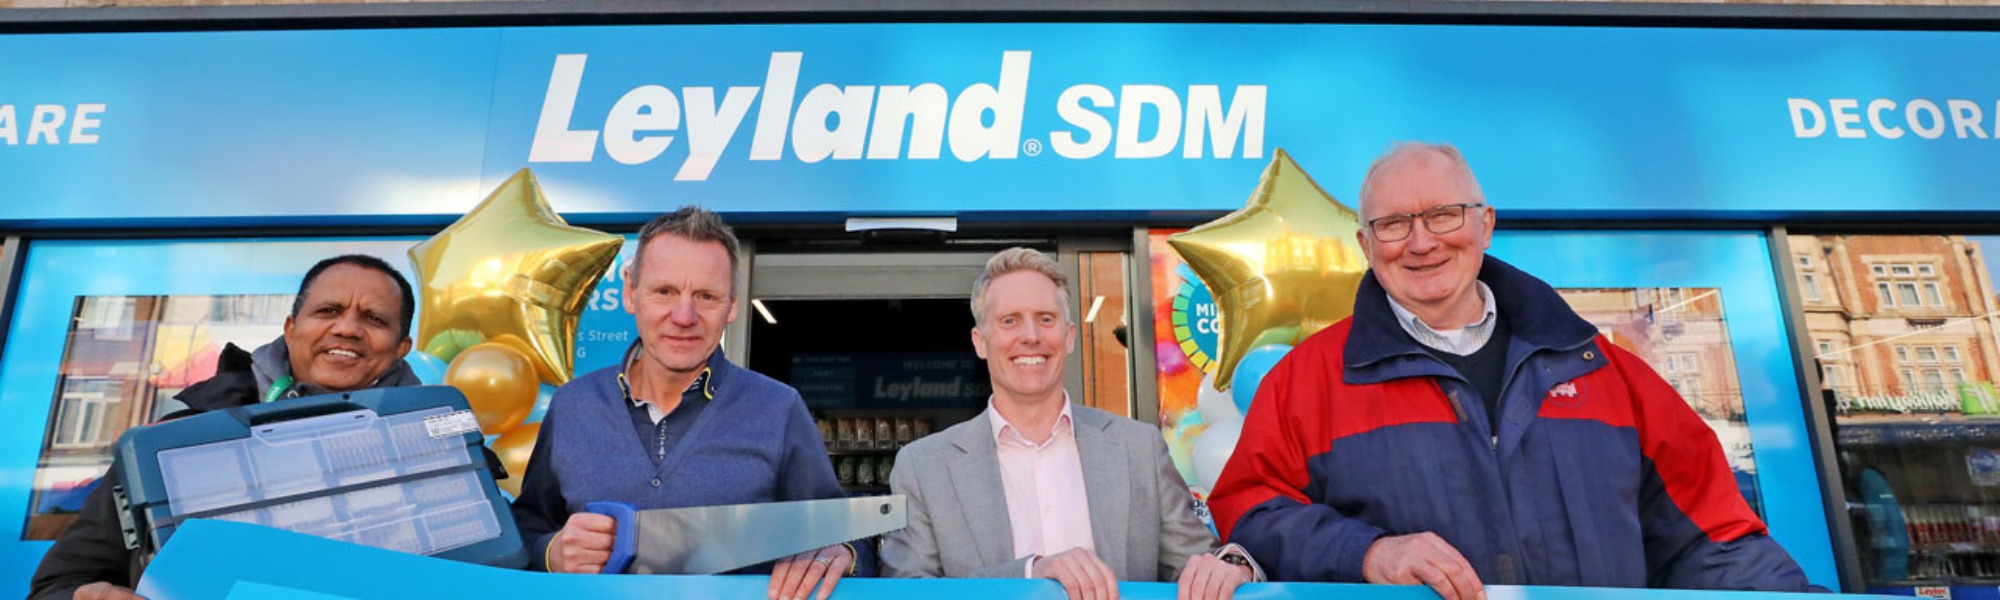 Leyland SDM supports Hammersmith community as store opens